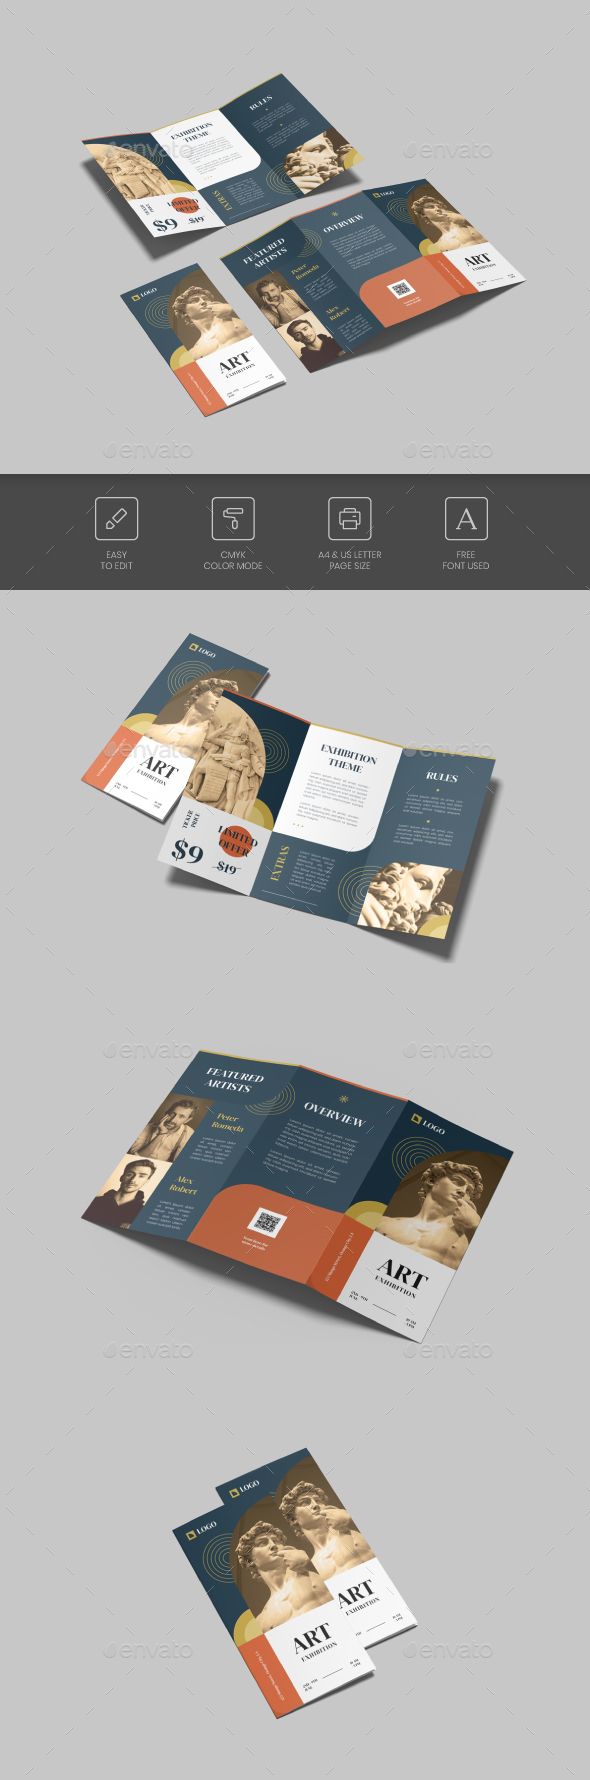 Event Trifold Brochure